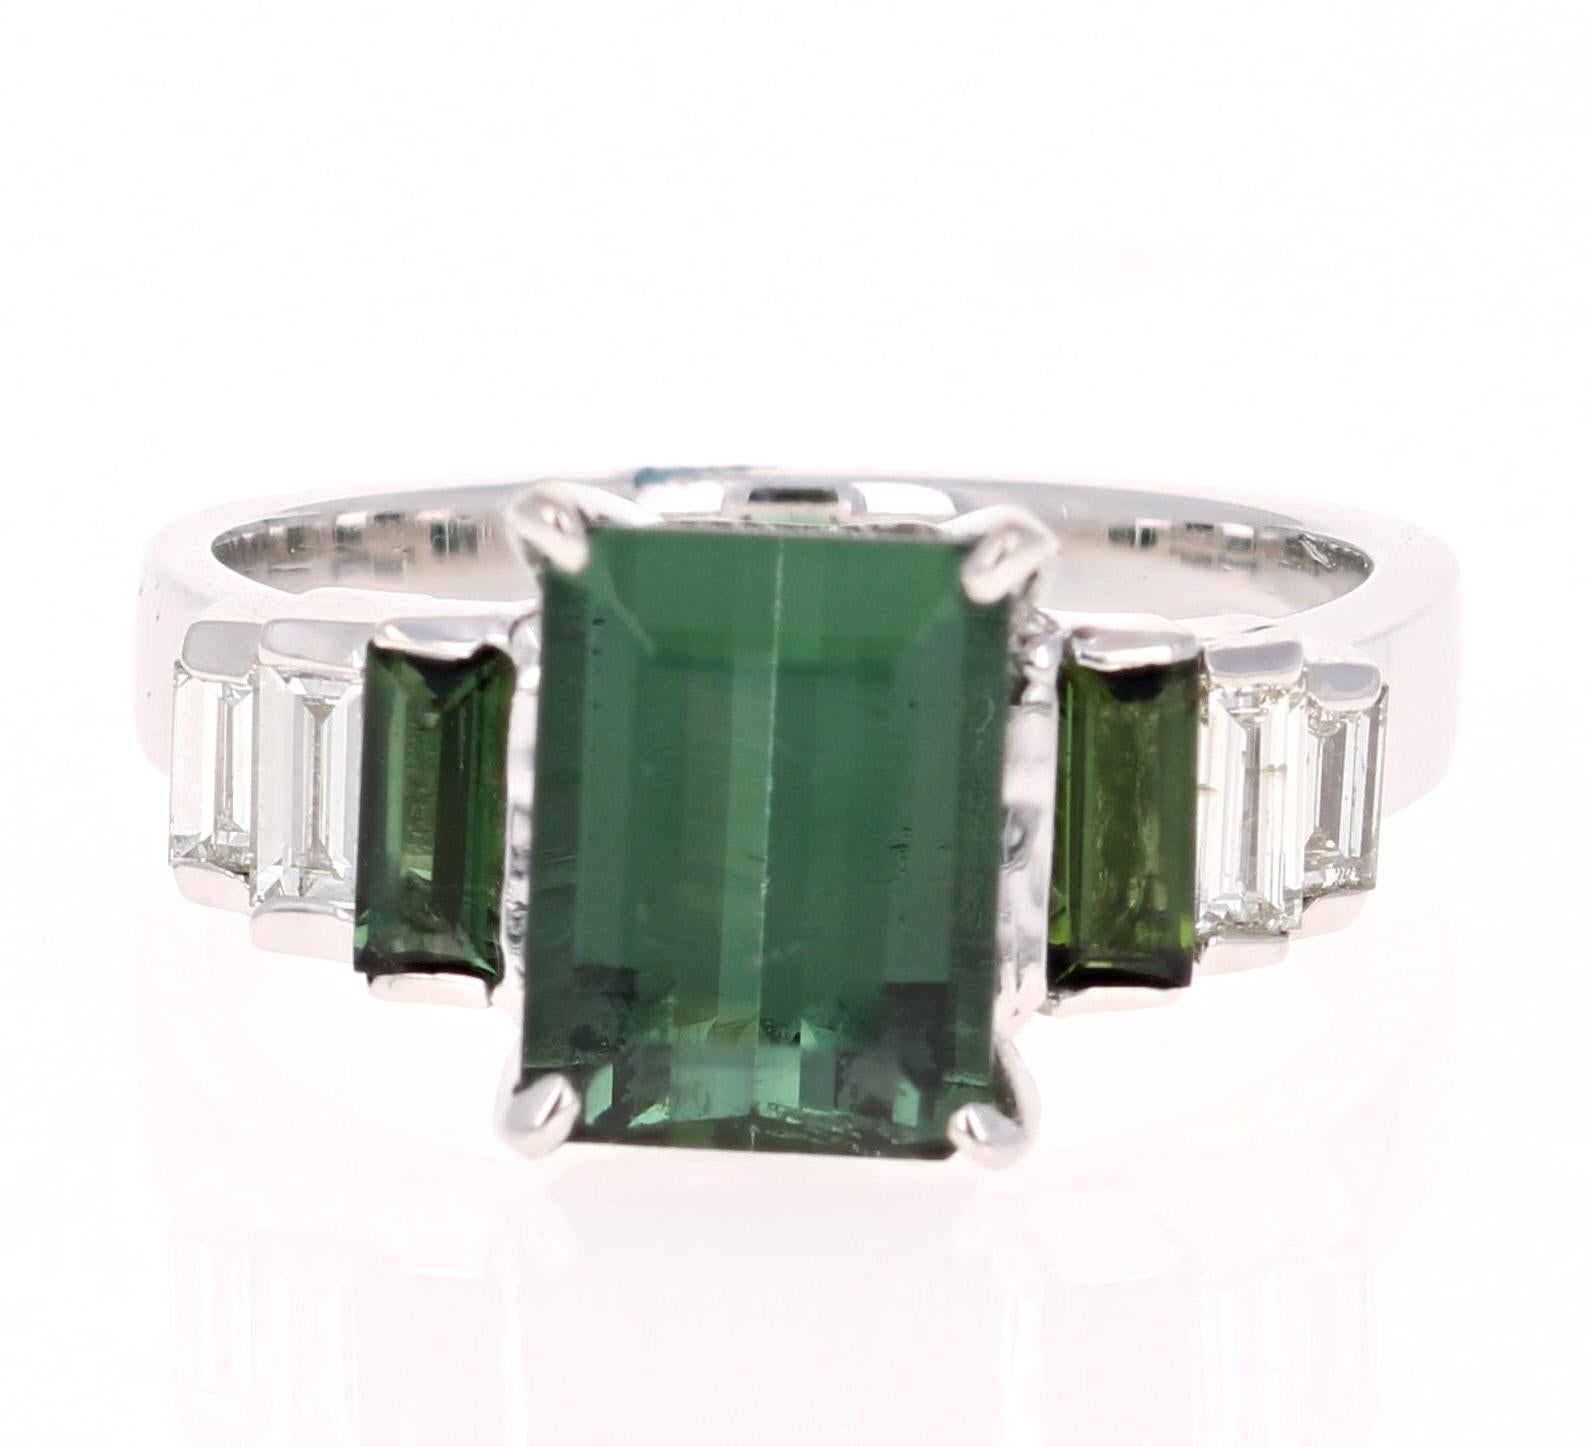 A unique beauty that is sure to be a rare and gorgeous design! Very much inspired by the articulate designs of the art-deco era.

This stunner has a Emerald Cut Green Tourmaline that weighs 2.41 Carats. Adjacent to the tourmaline are 2 Baguette Cut